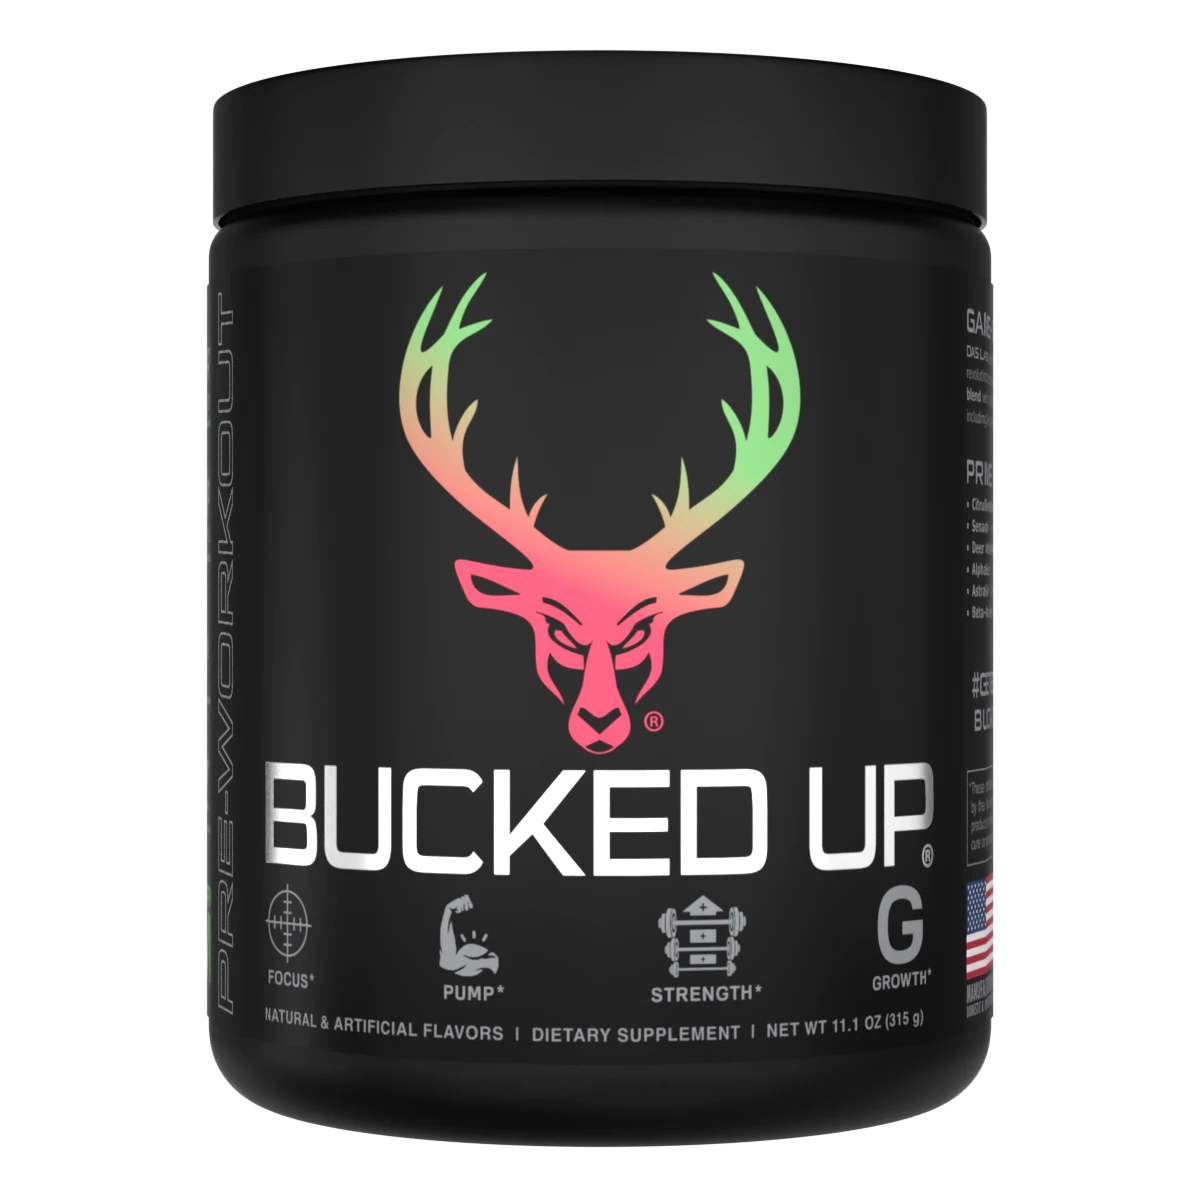 Bucked Up Pre-Workout by Bucked Up (DAS)